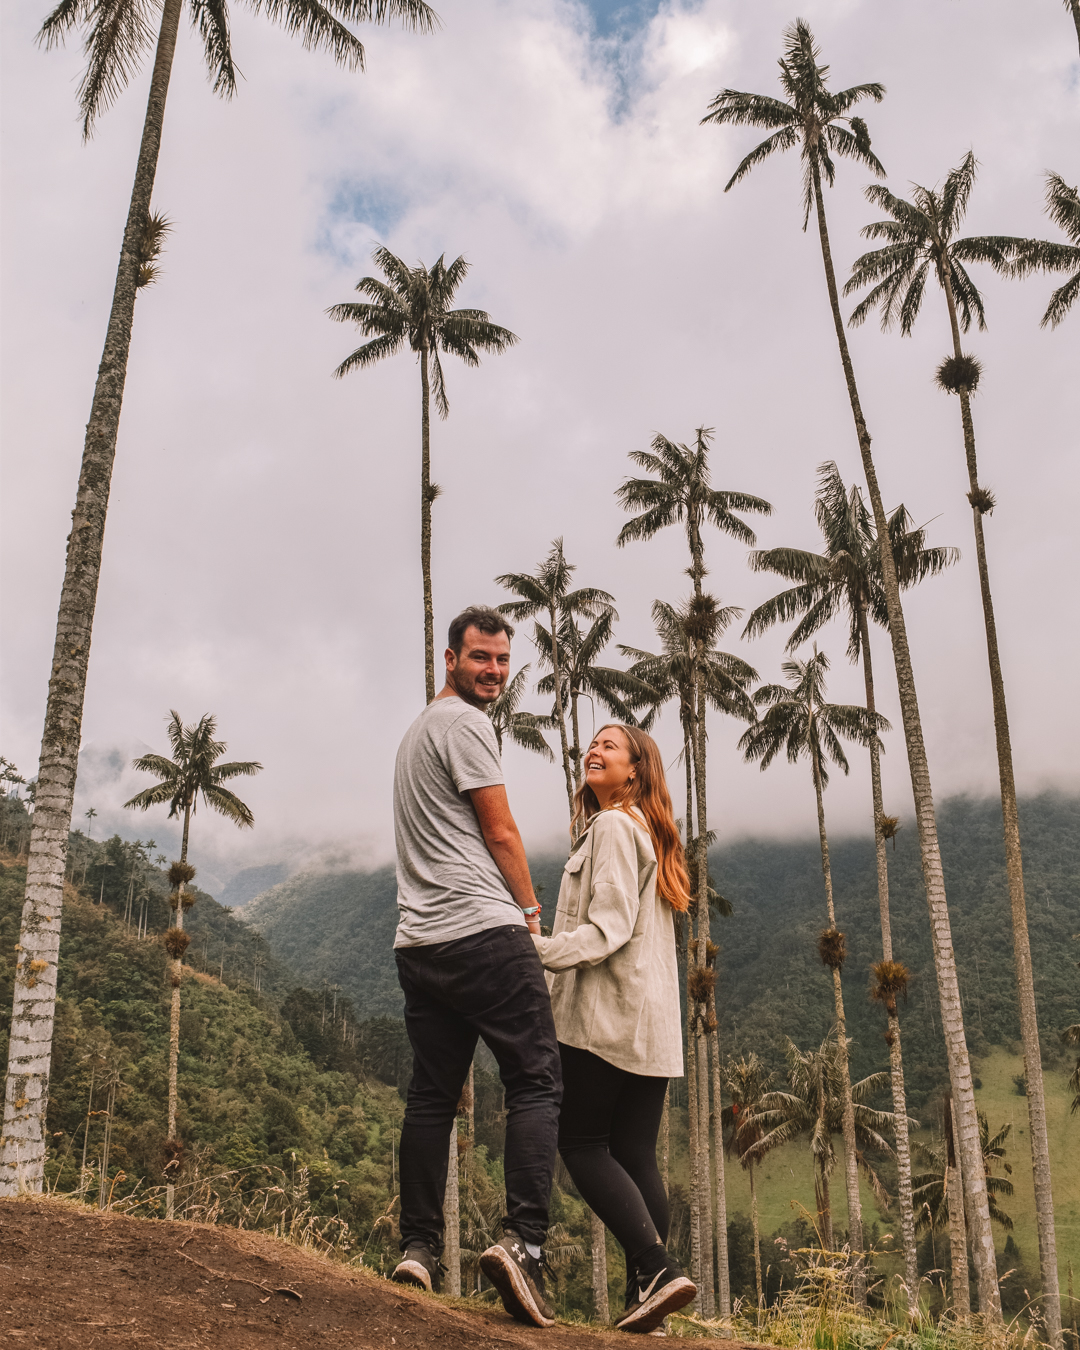 Travelling to Colombia? Visit The Cocora Valley. Tallest palm trees in the world